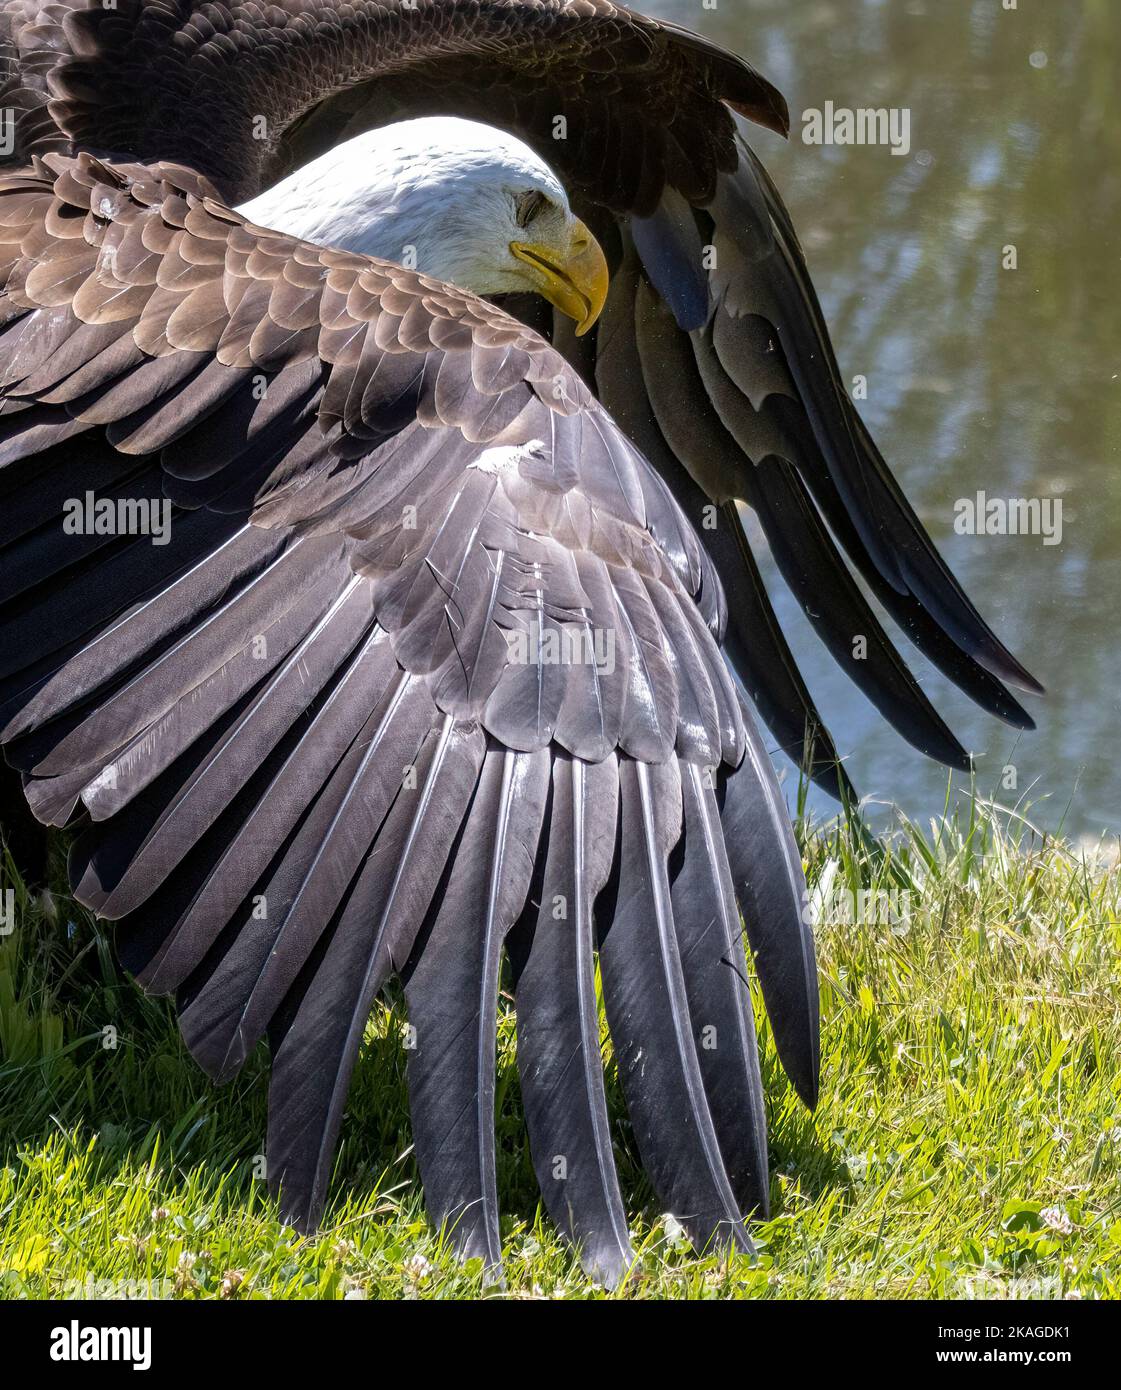 North American Bald Eagle On Ground Wings Slightly Spread Out Side View  Haliaeetus leucocephalus Stock Photo